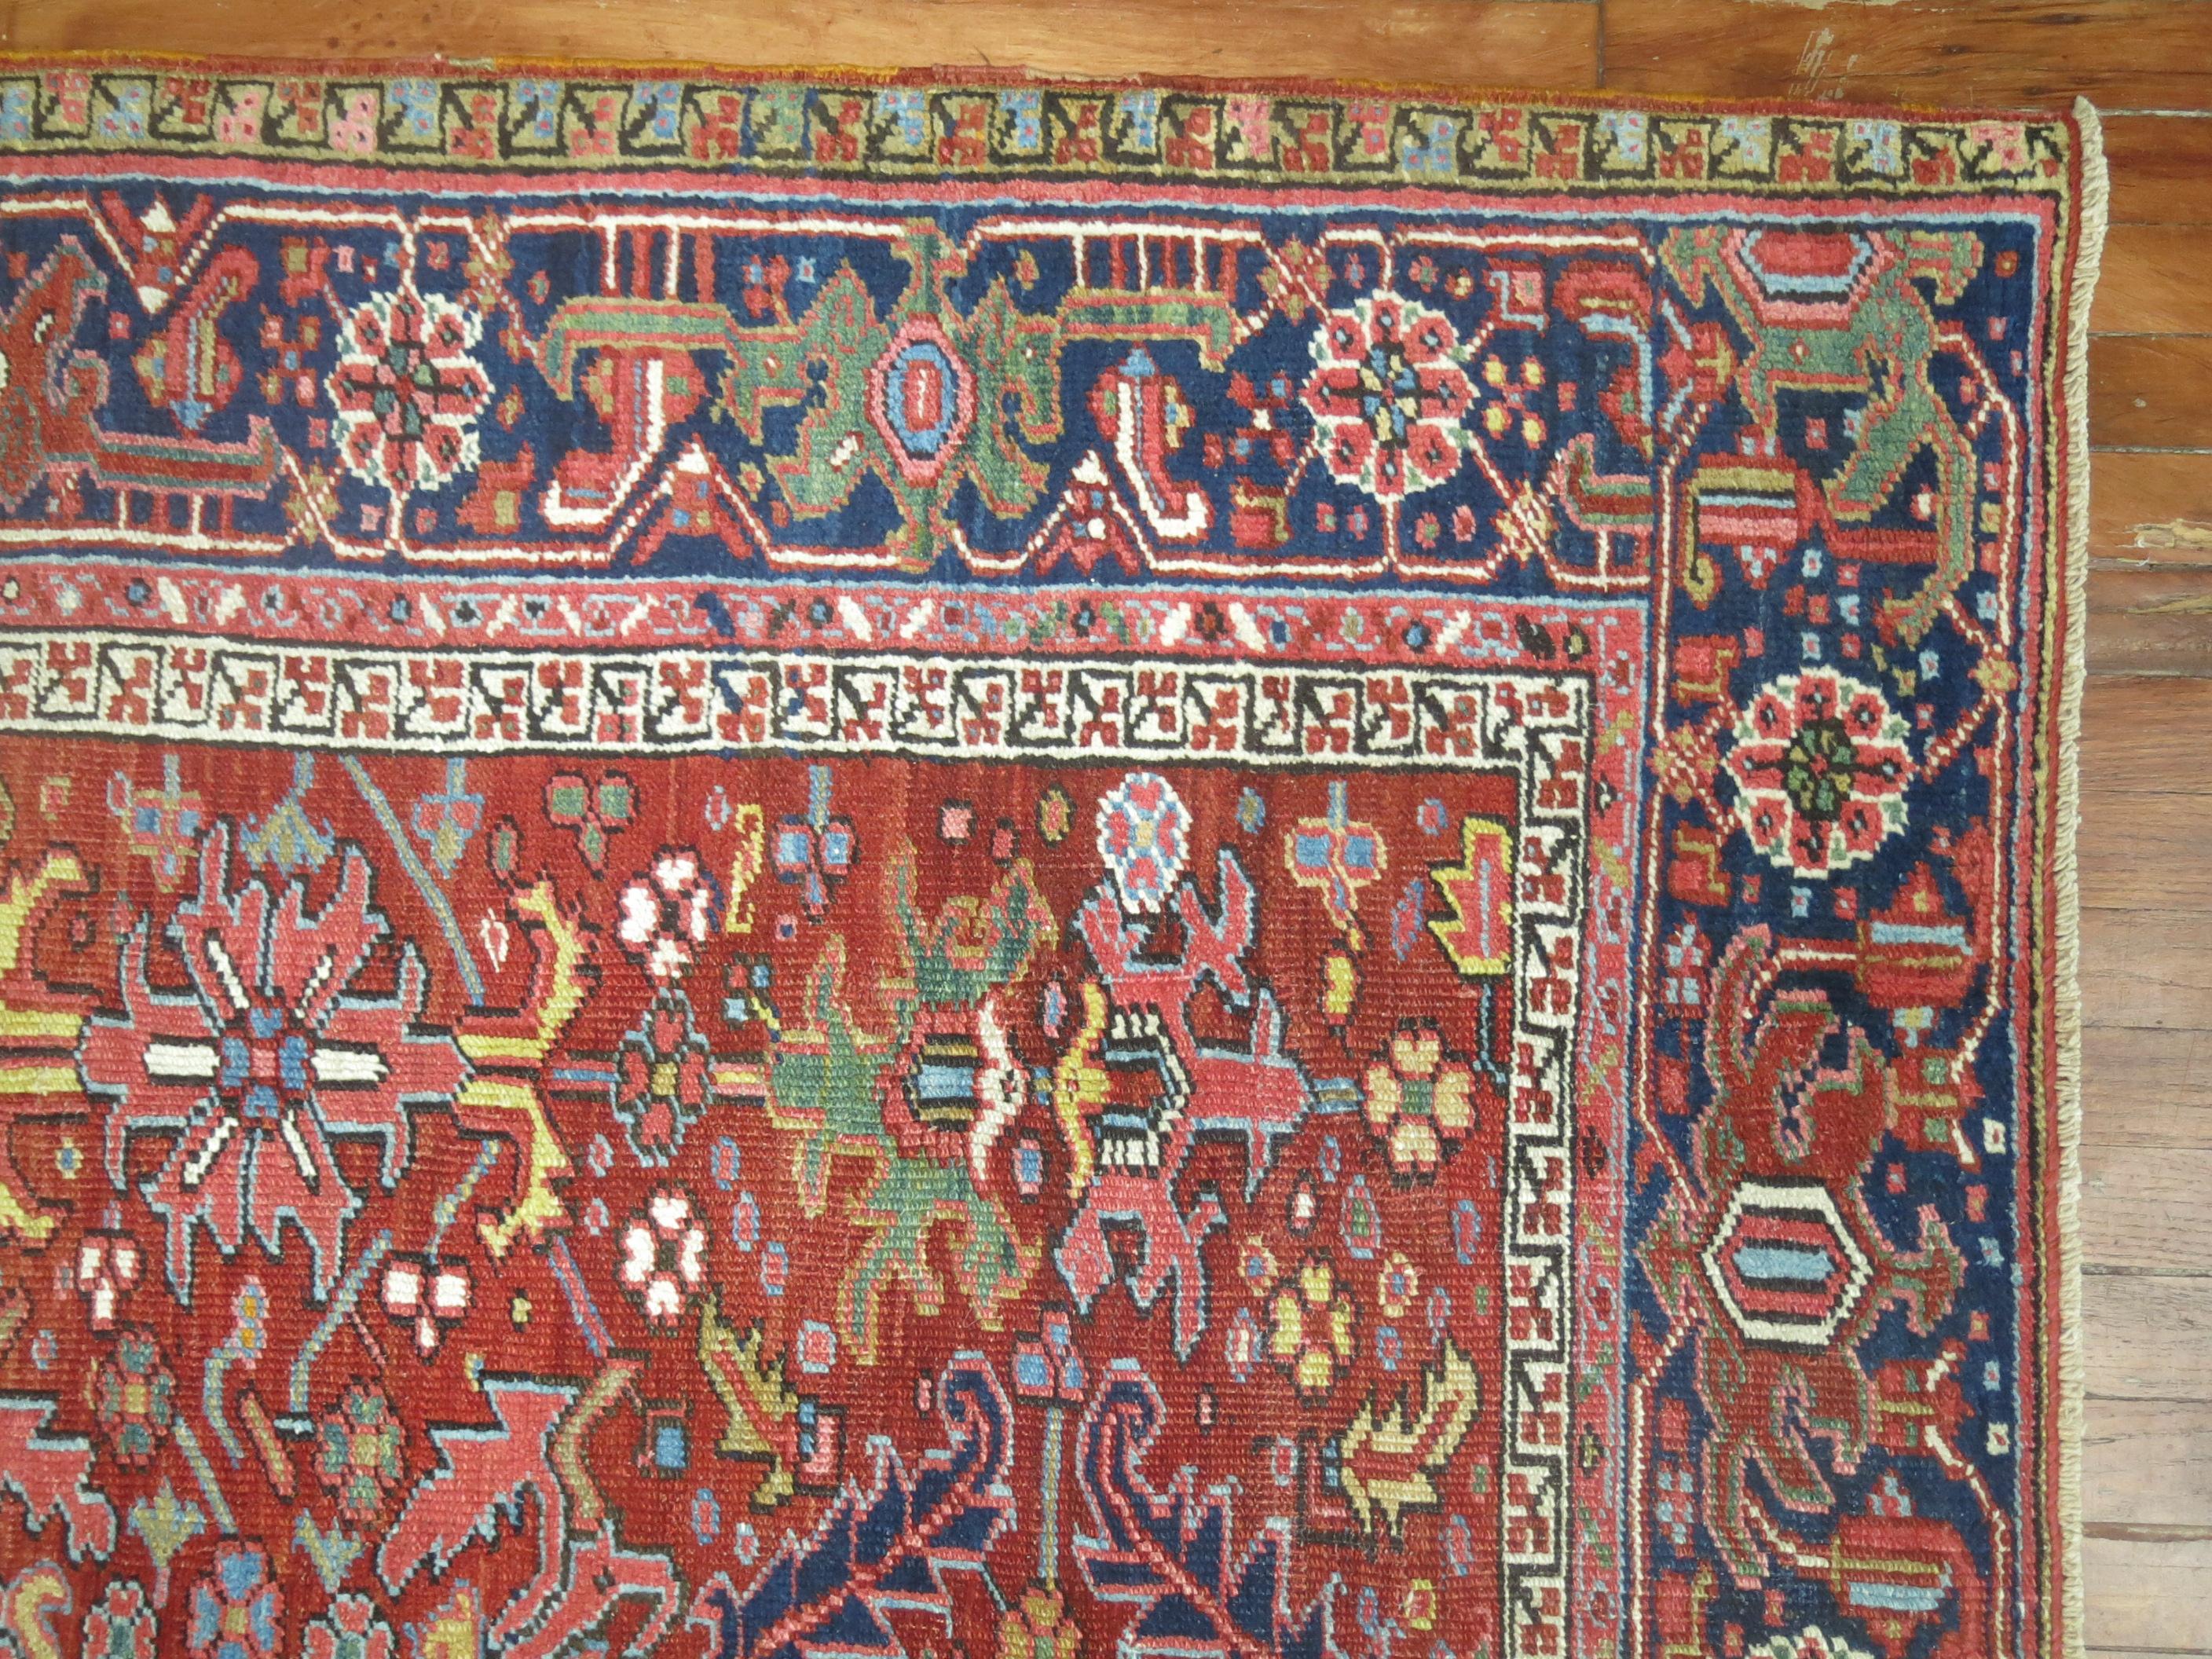 An early 20th century Persian Heriz room size colorful rug.

Measures: 7'4'' x 10'6''.